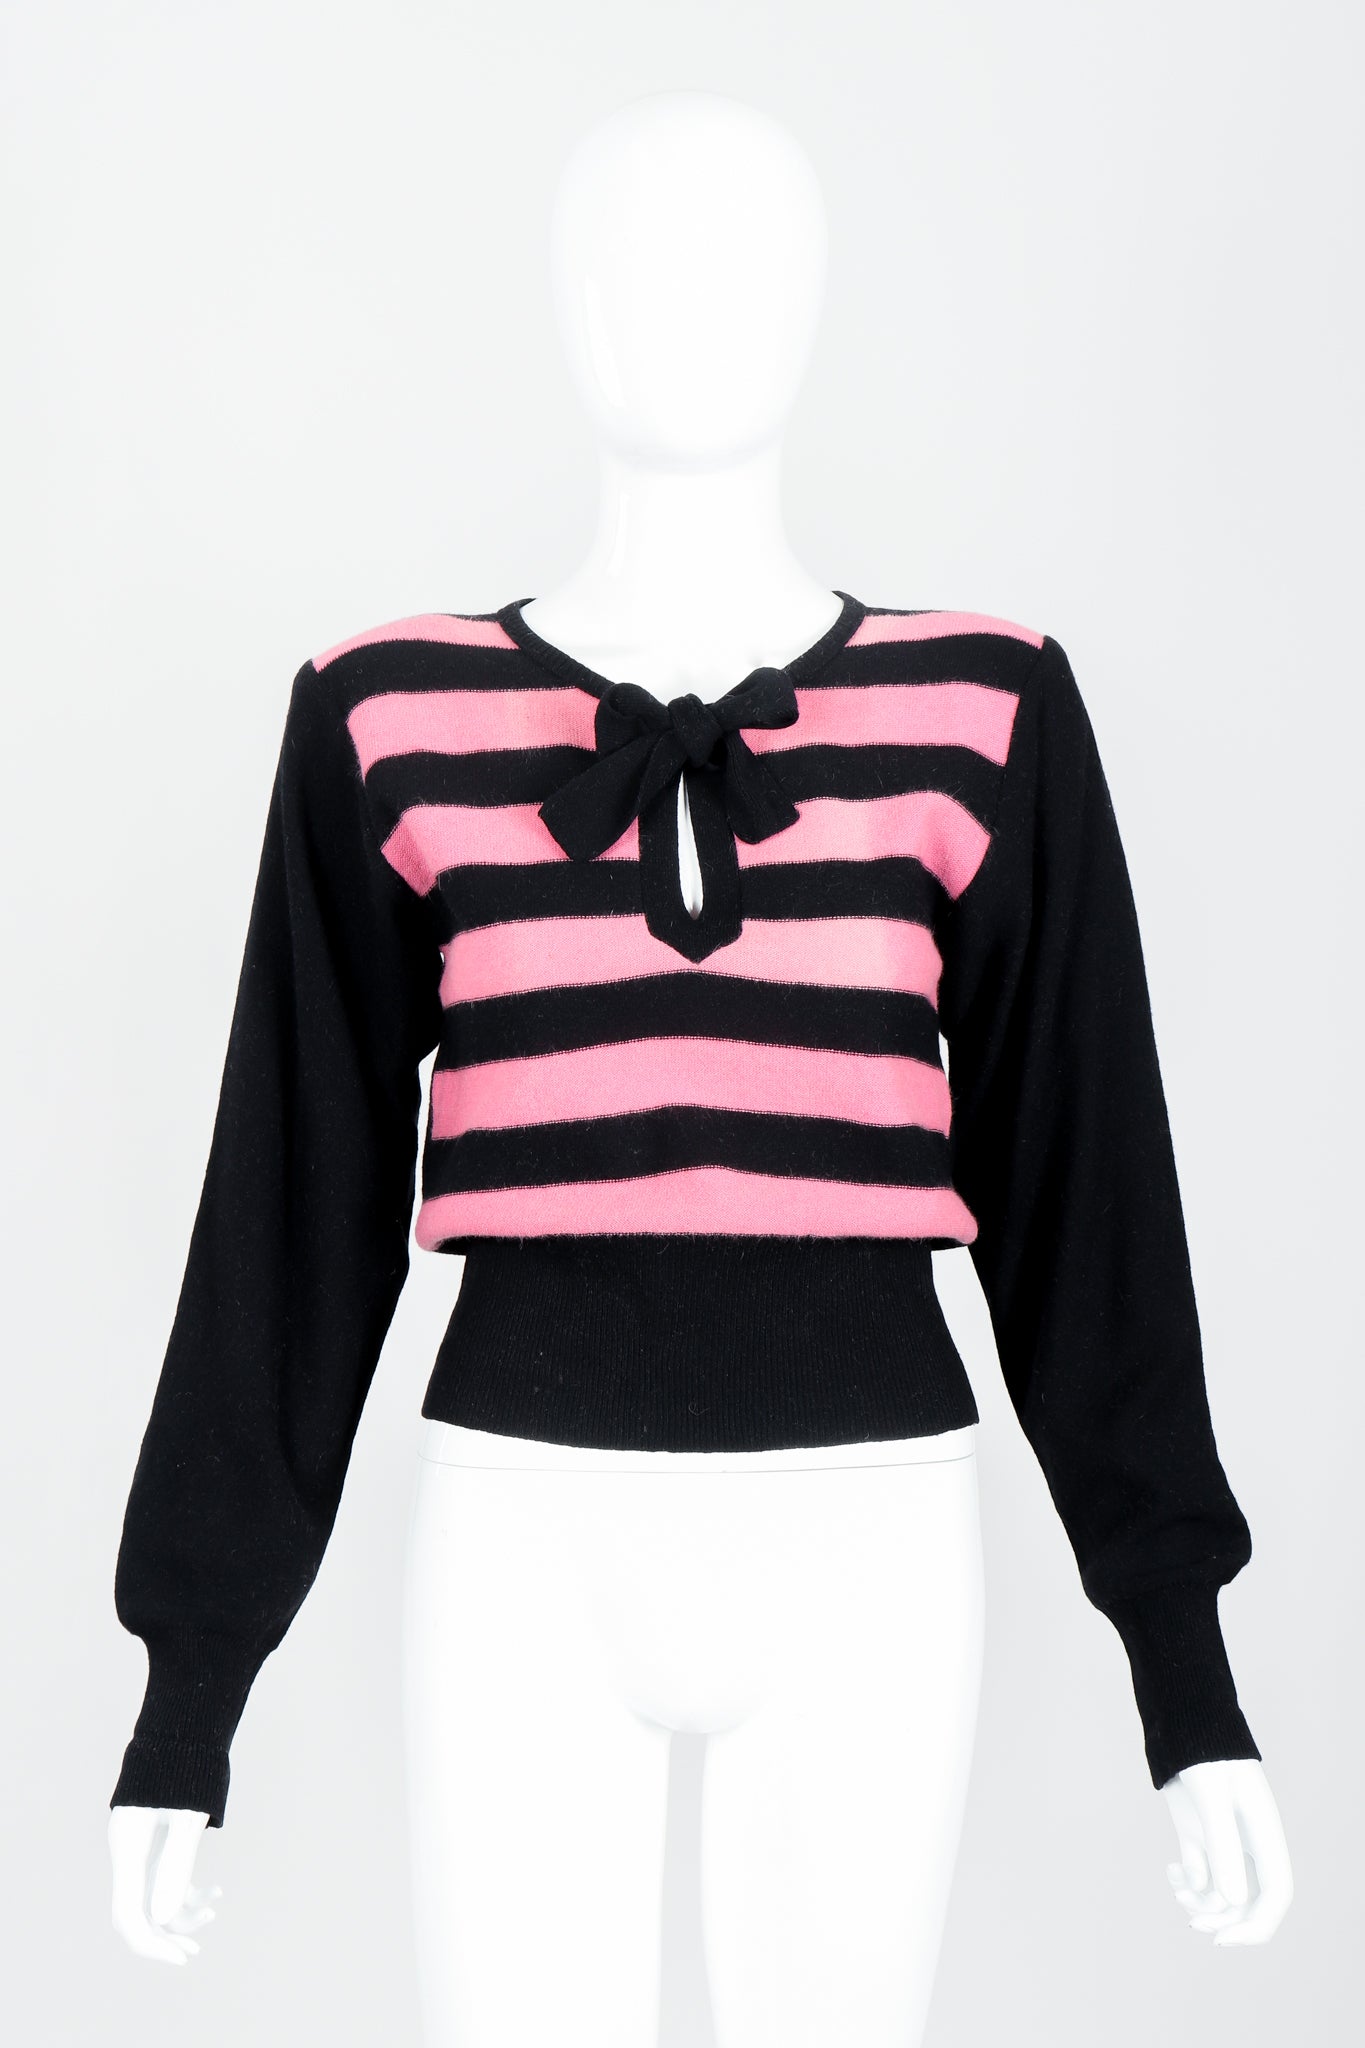 Vintage Sonia Rykiel Pink Stripe Keyhole Tie Neck Sweater on Mannequin Front at Recess